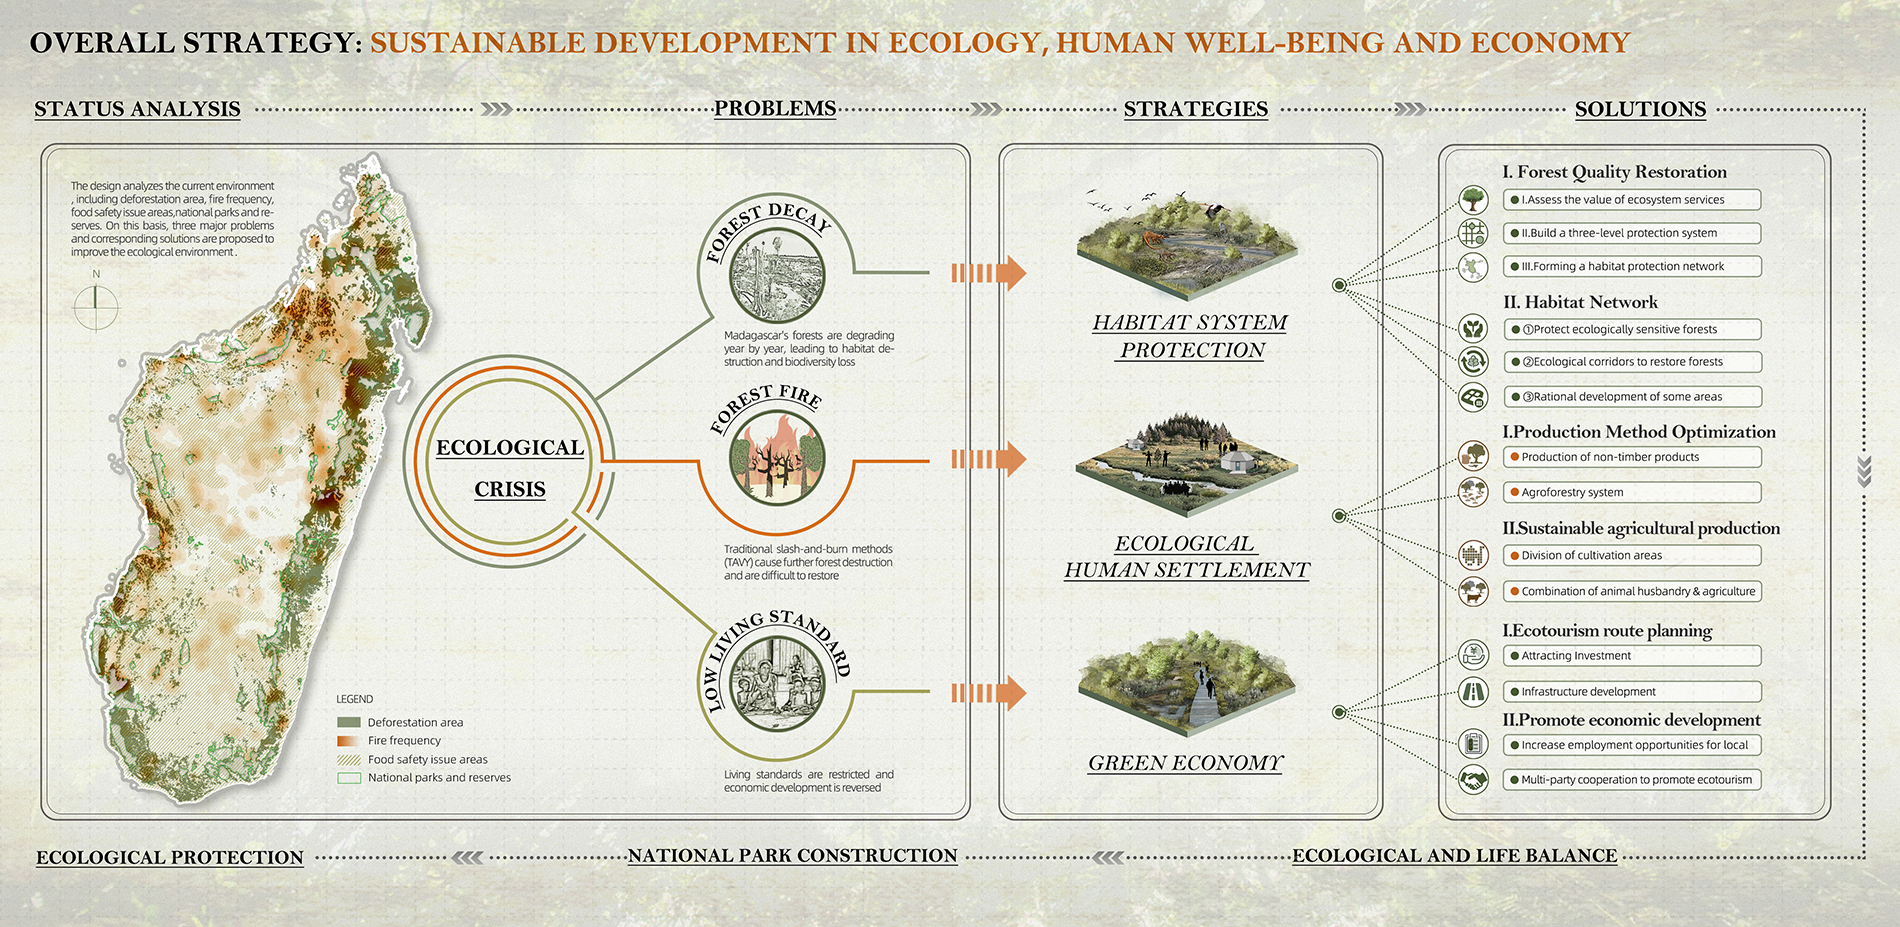 Overall Strategy: Sustainable Development in Ecology, Human Well-being and Economy